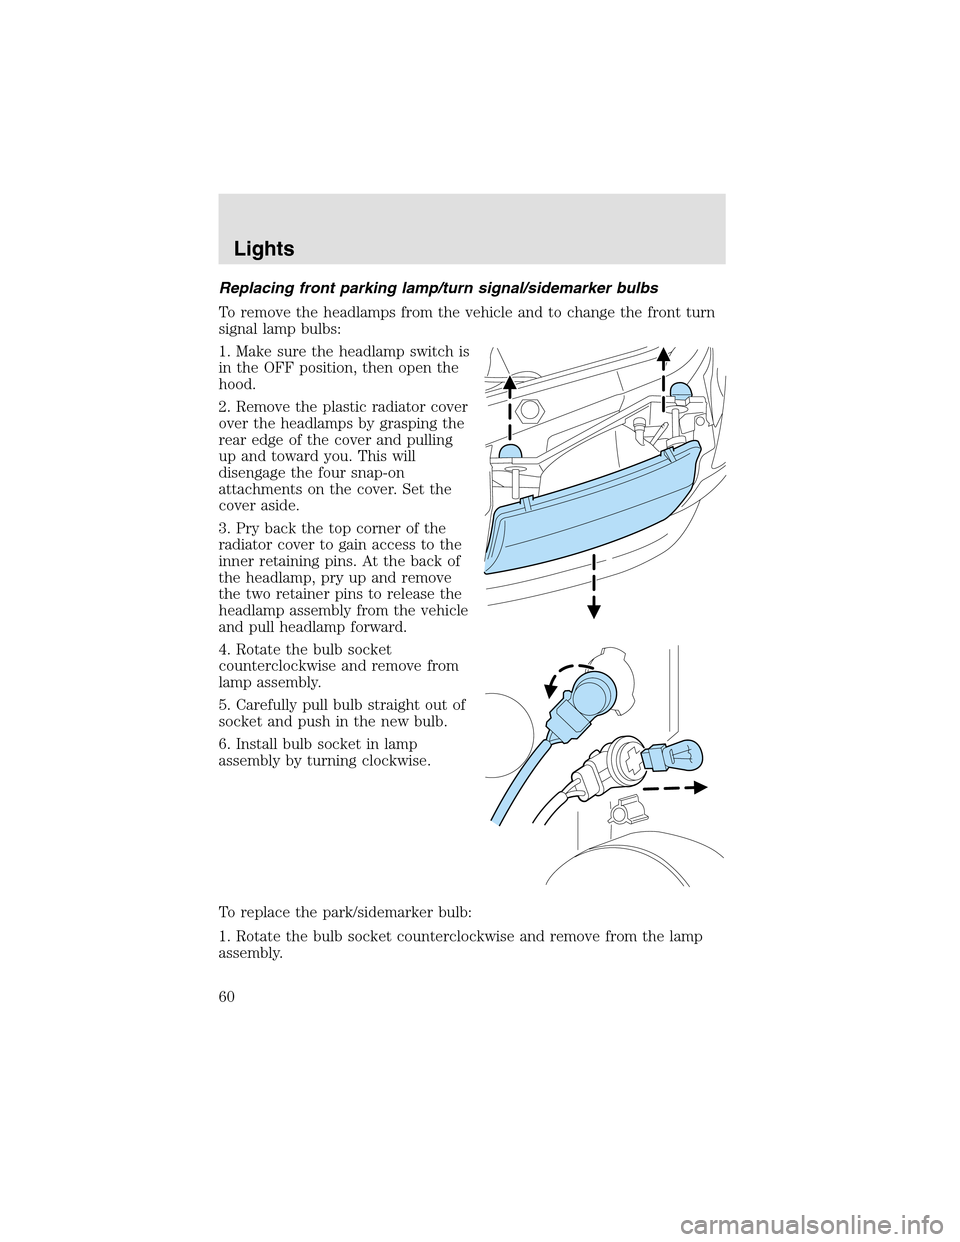 LINCOLN AVIATOR 2003  Owners Manual Replacing front parking lamp/turn signal/sidemarker bulbs
To remove the headlamps from the vehicle and to change the front turn
signal lampbulbs:
1. Make sure the headlampswitch is
in the OFF position